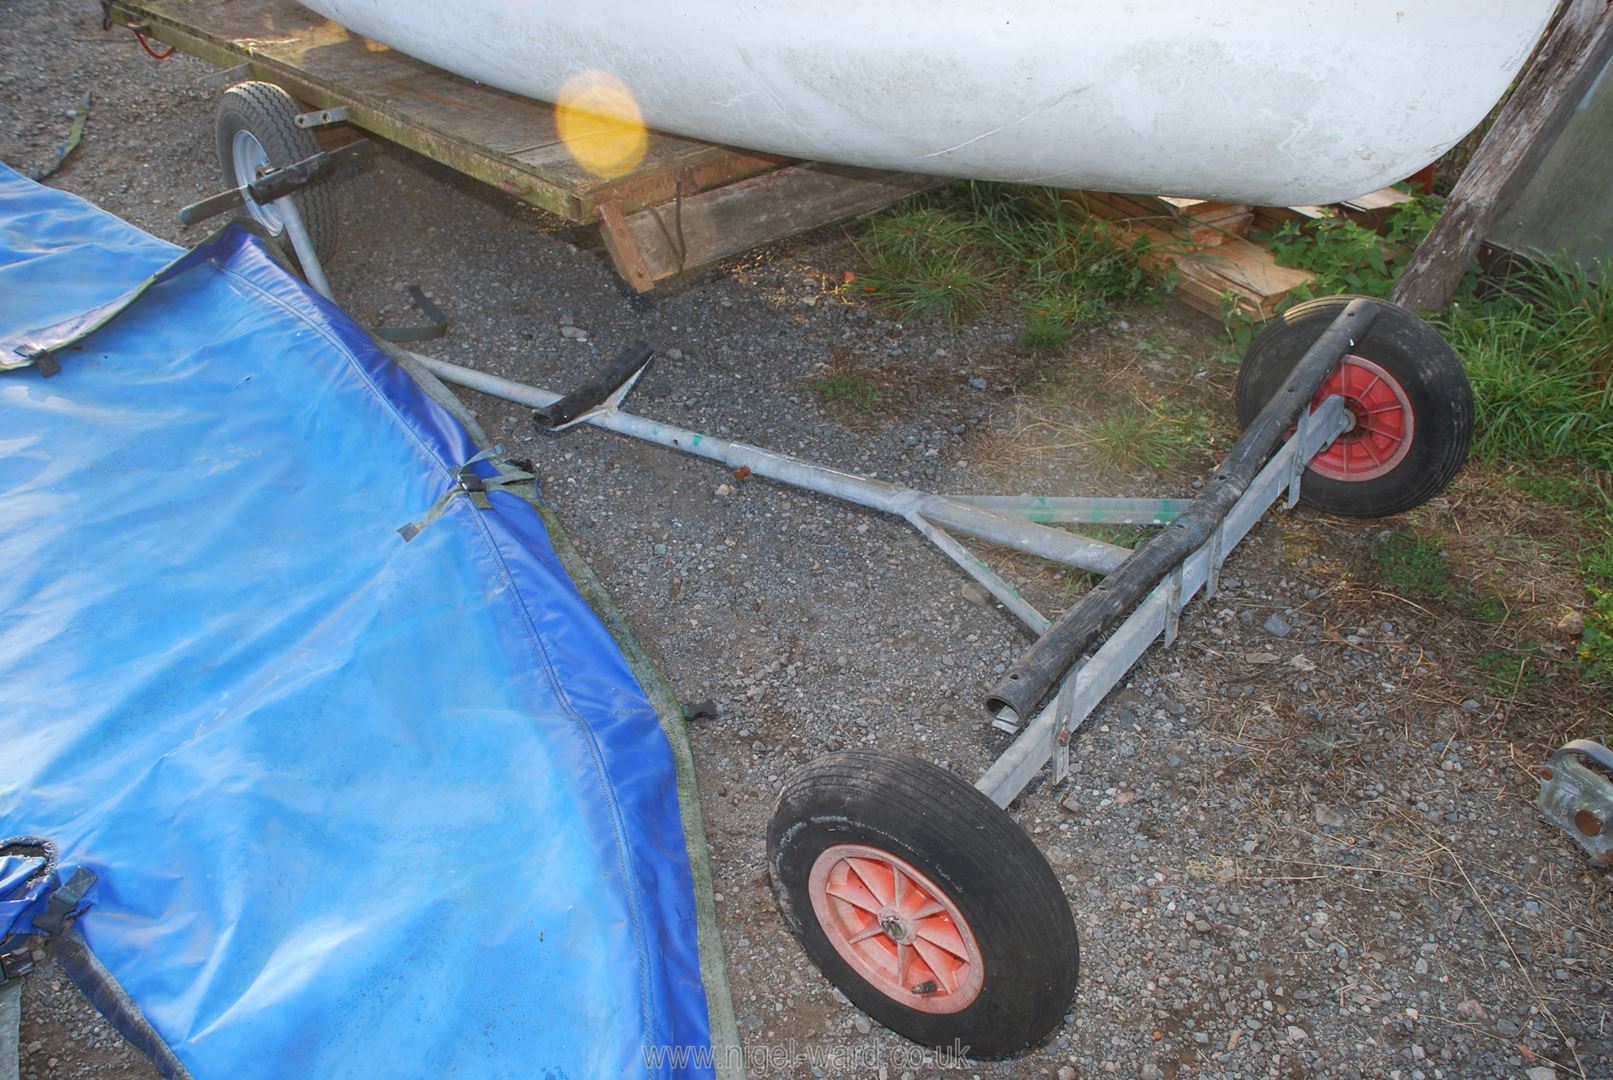 A glass fibre hulled sailing dinghy for restoration with 17' 2" high aluminium mast, fittings, - Image 11 of 14